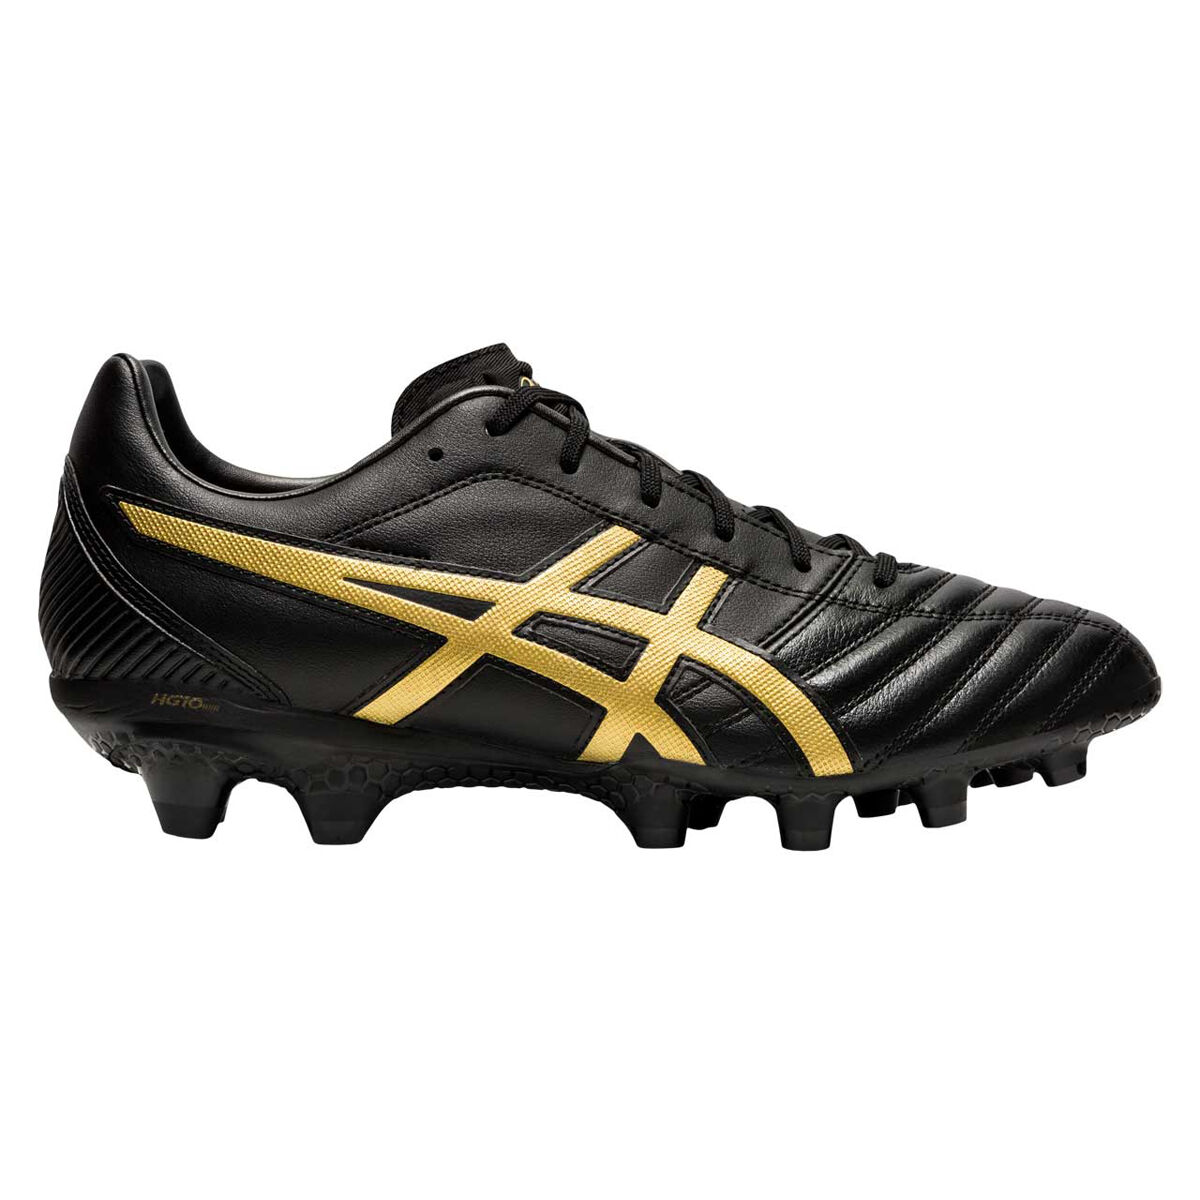 Asics Lethal Flash IT Football Boots 